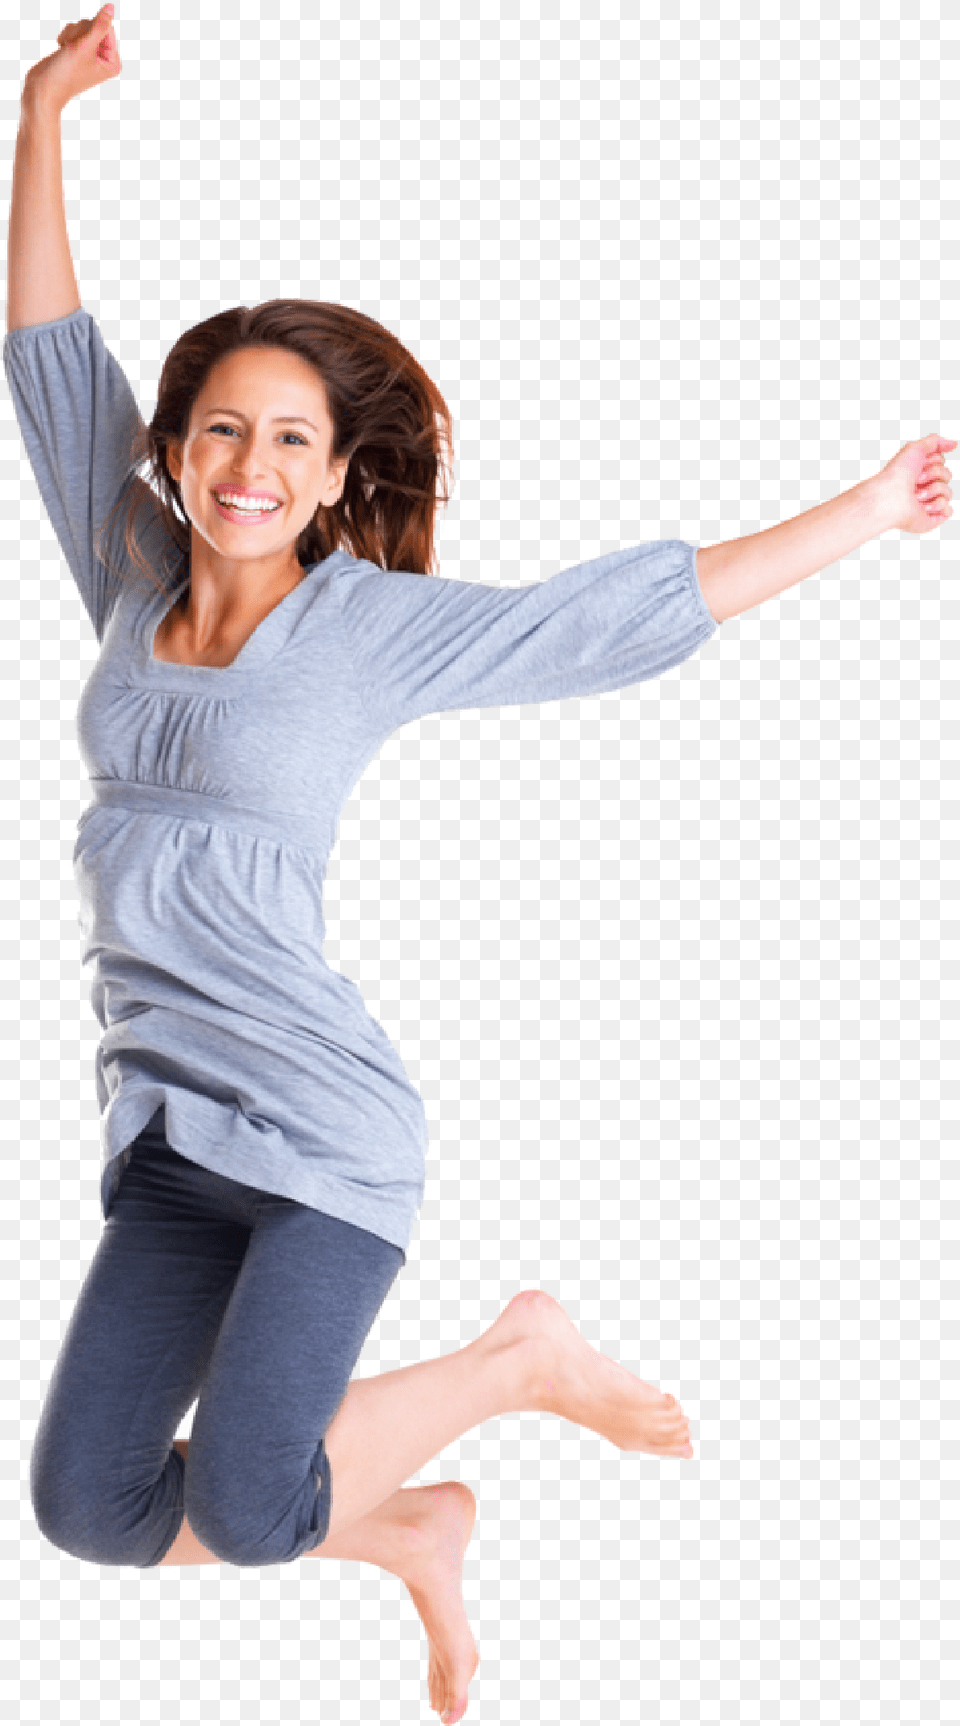 Happy Person Jumping Happy Woman Jumping, Hand, Body Part, Finger, Adult Png